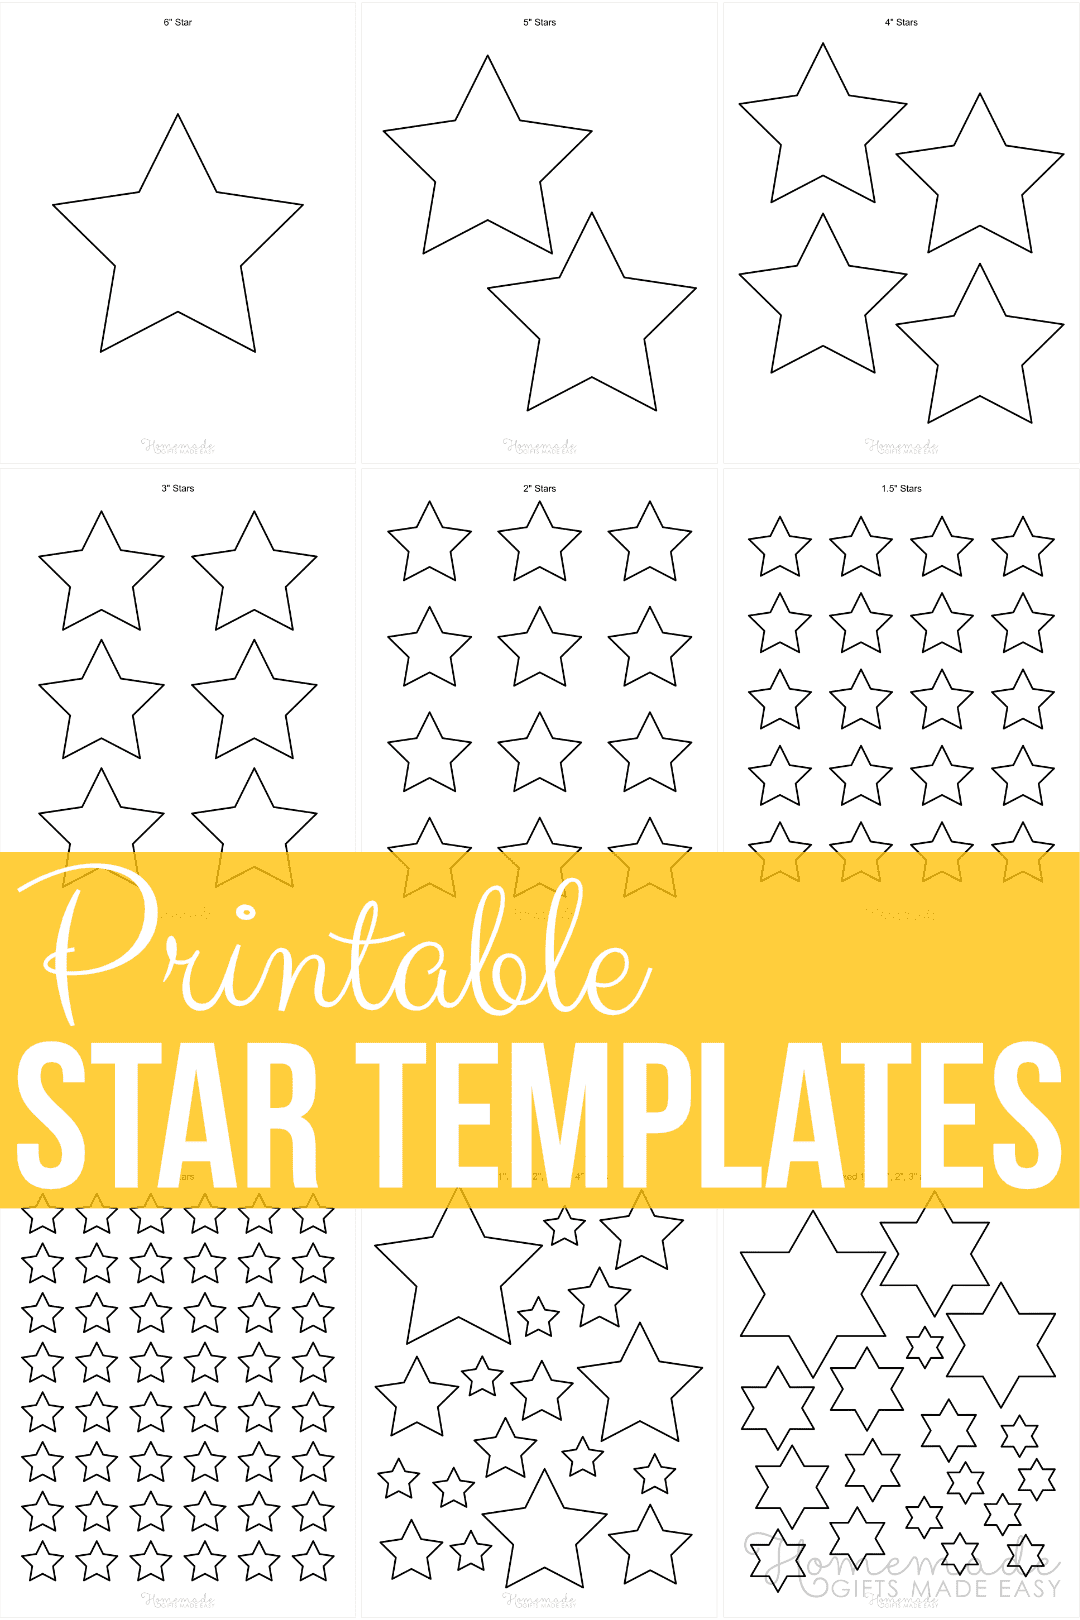 Free Printable Star Templates Outlines Small To Large Sizes 1 Inch To 8 Inch